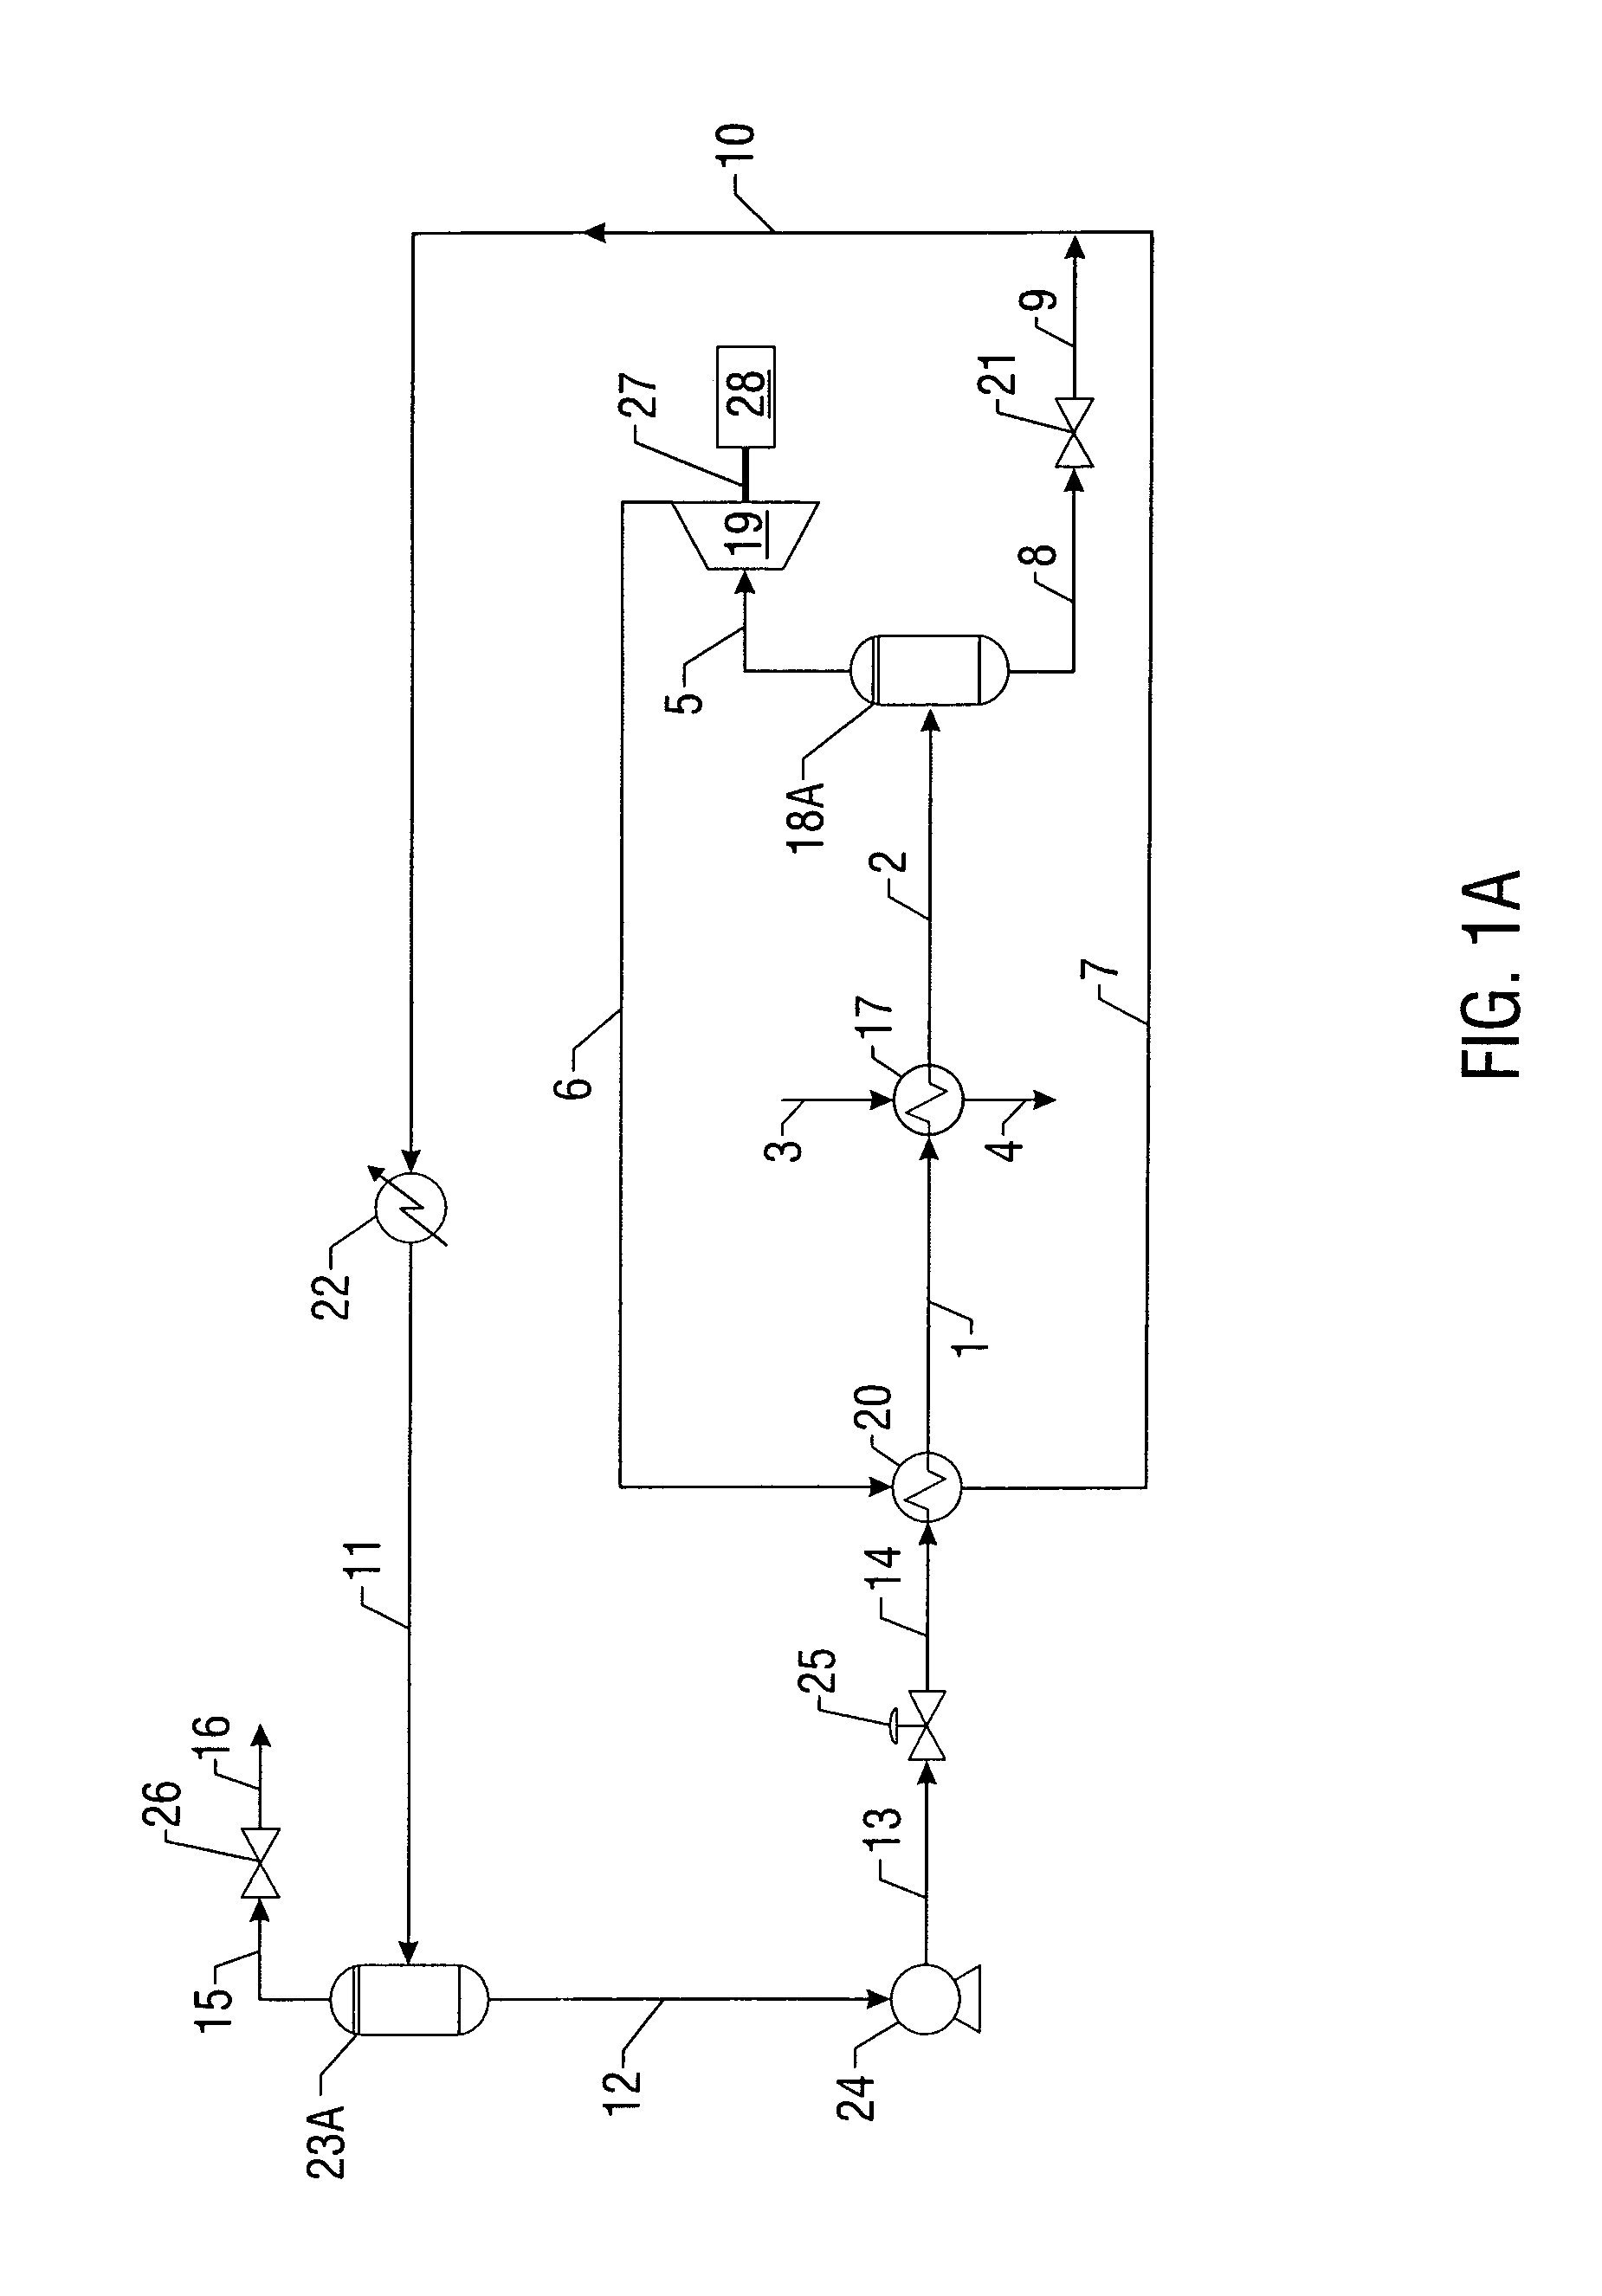 Advanced heat recovery and energy conversion systems for power generation and pollution emissions reduction, and methods of using same